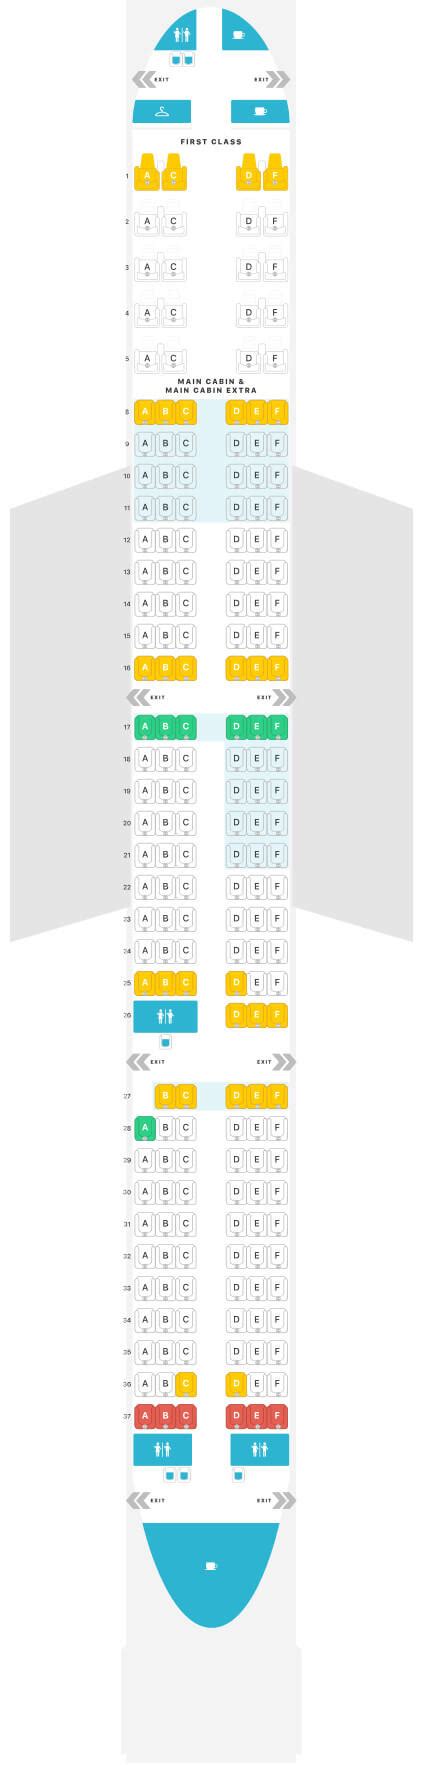 Airbus A Neo American Airlines Seat Map Airportix